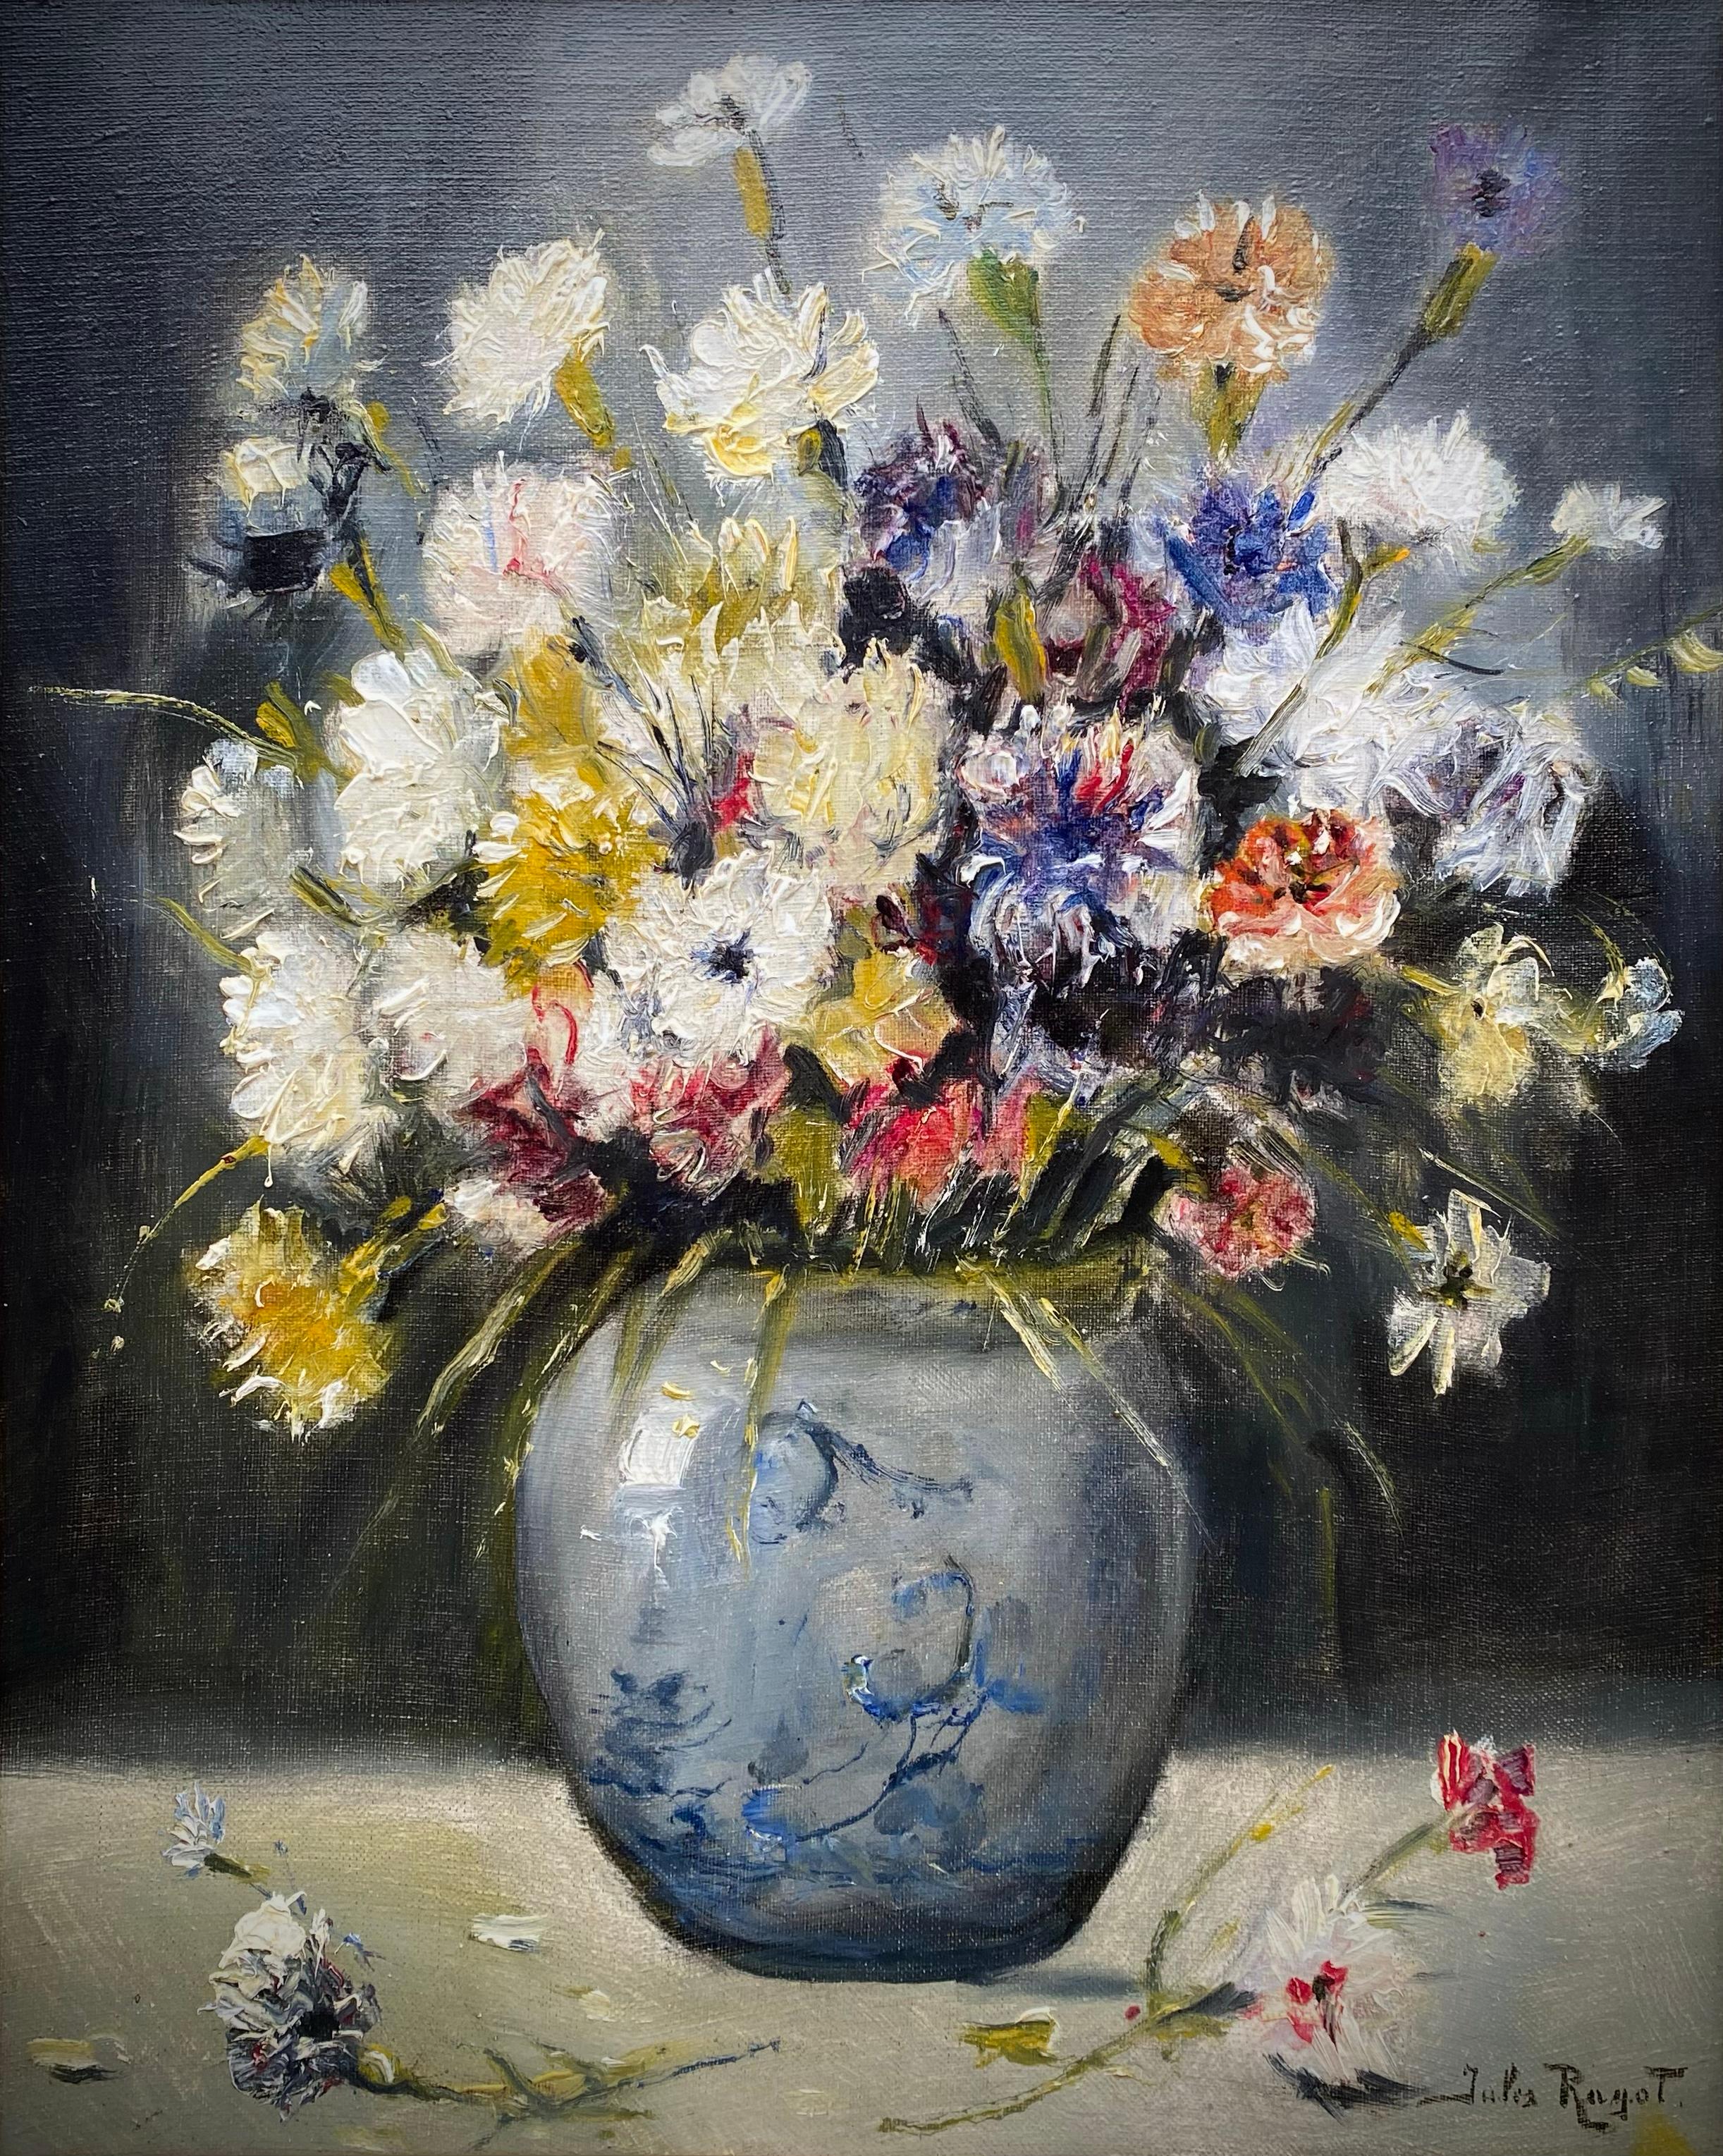 Ragot Jules Félix
Paris 1835 – 1912 Brussels
French Painter

'StillLlife of Wild Flowers'
Signature: Signed lower right
Medium: Oil on canvas
Dimensions: Image size 50 x 40 cm, frame size 72 x 62,50 cm

Biography: Ragot Jules Félix, born in Paris in